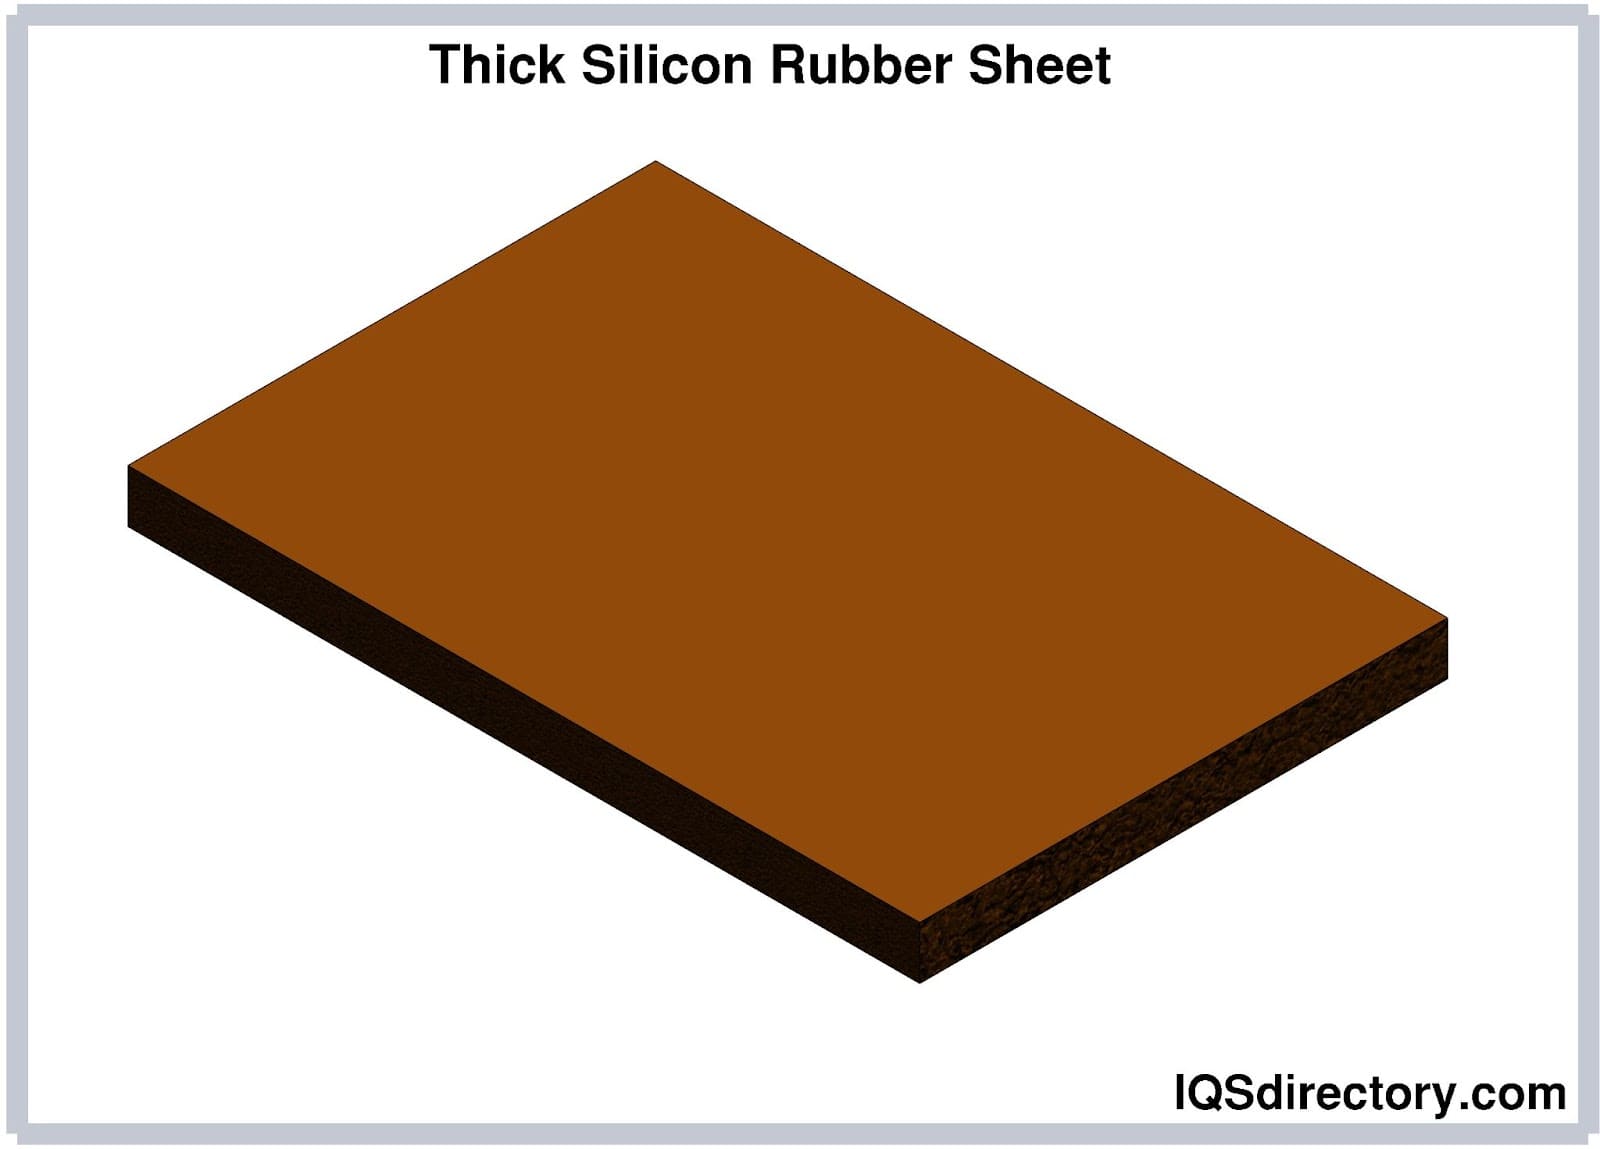 What Are The Benefits Of A Rubber Counter Mat?